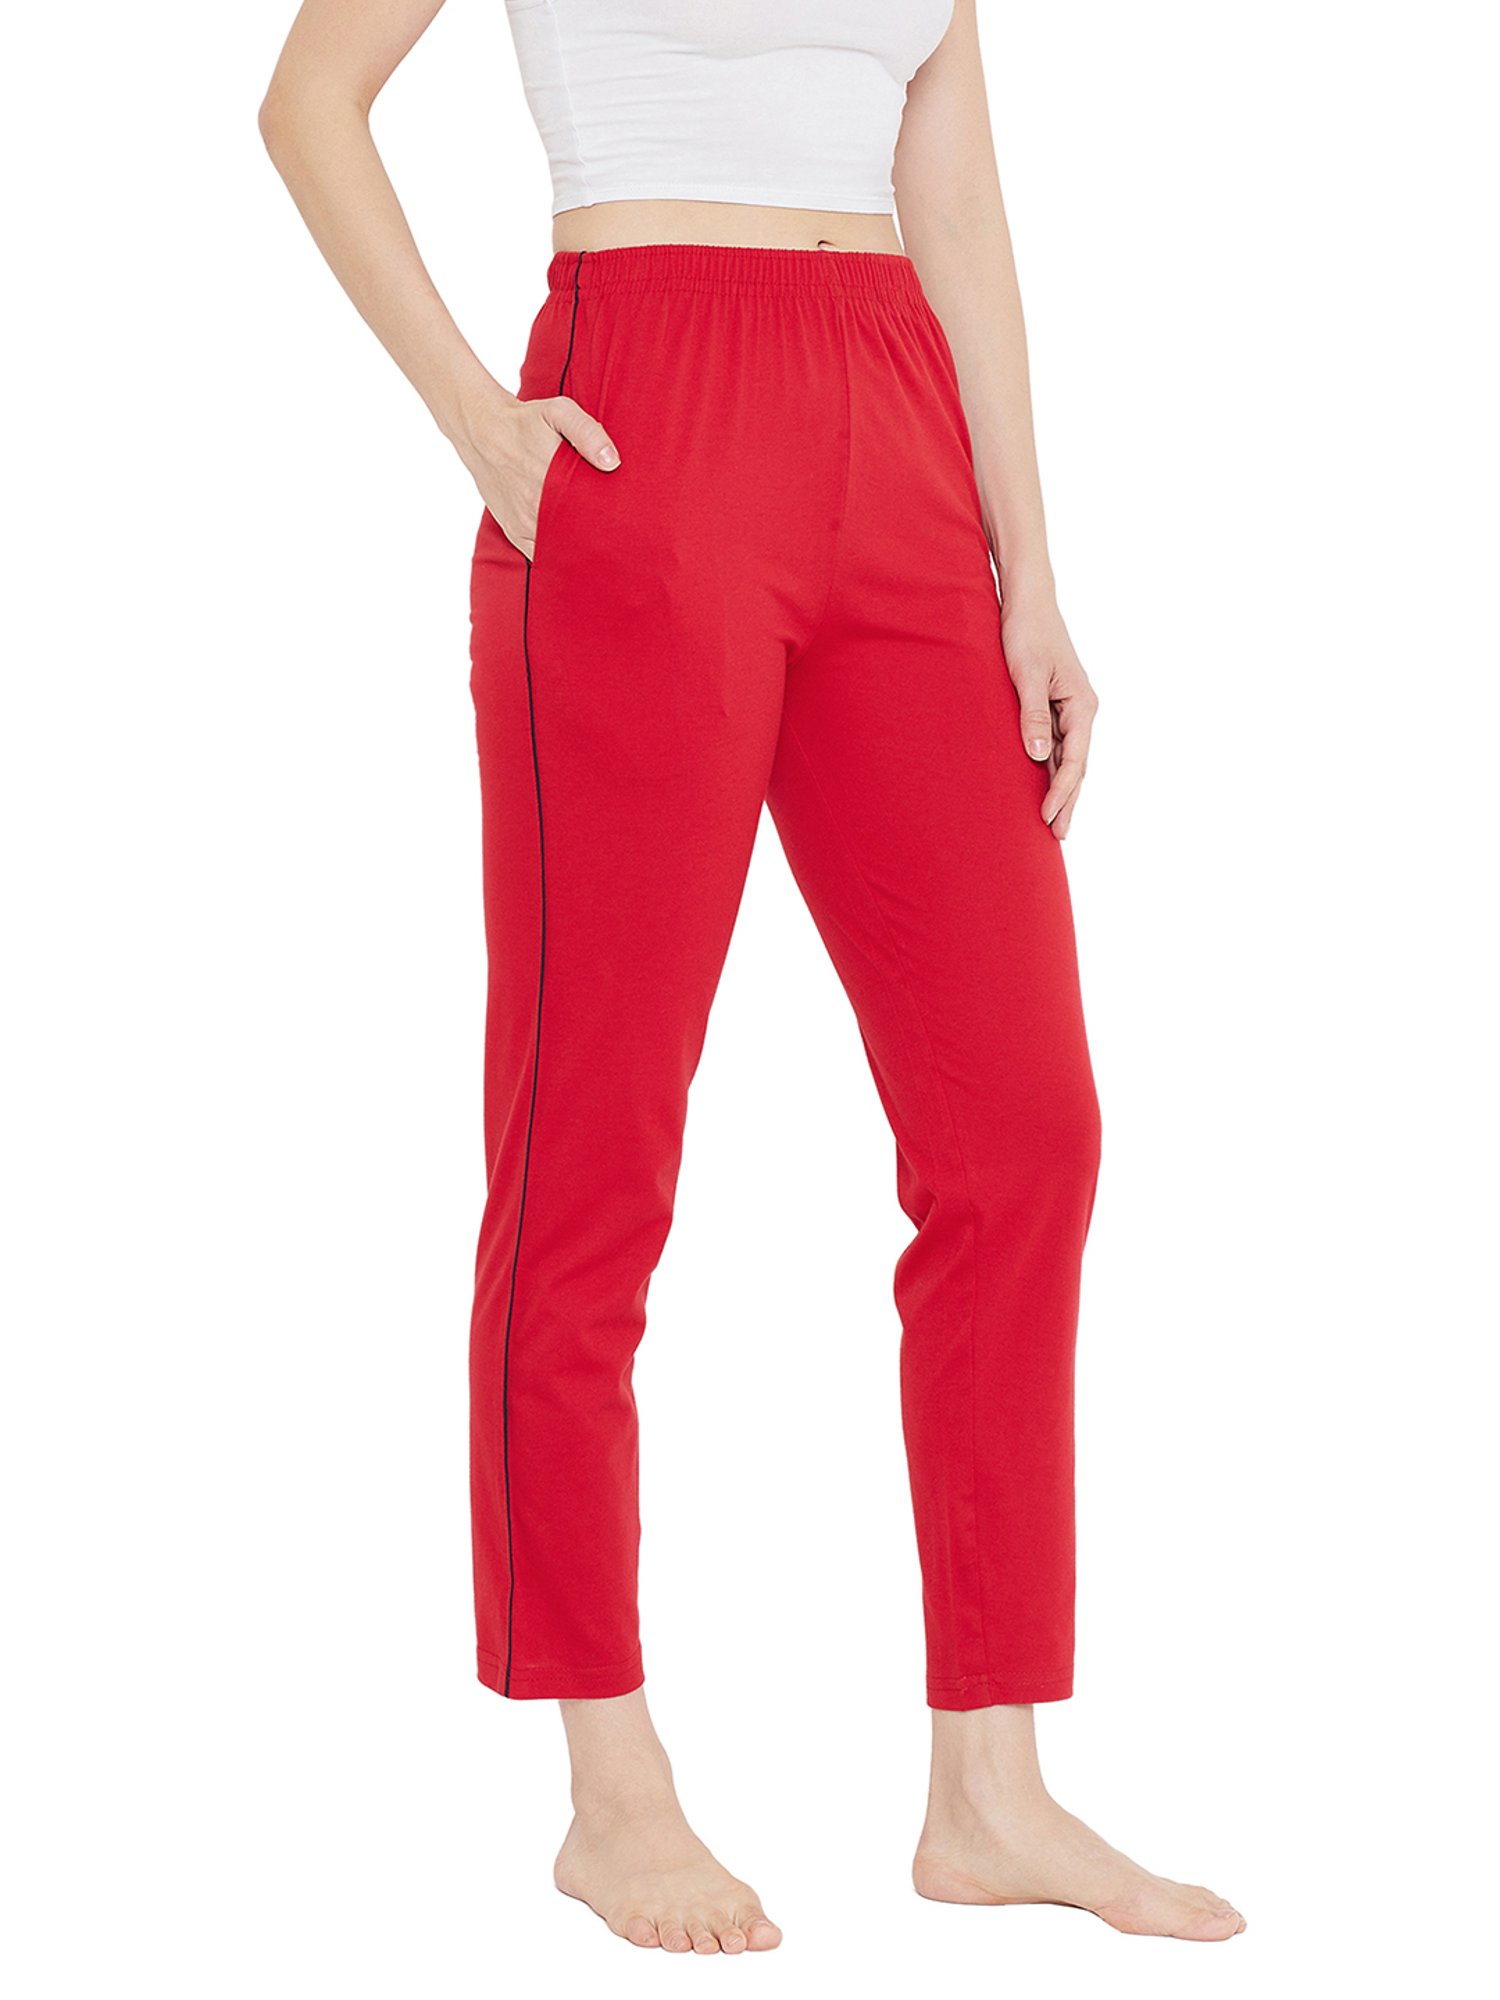 Red Checked Premium Cotton Lounge Pant Pajama Online In India Color Red  SizeShirt M